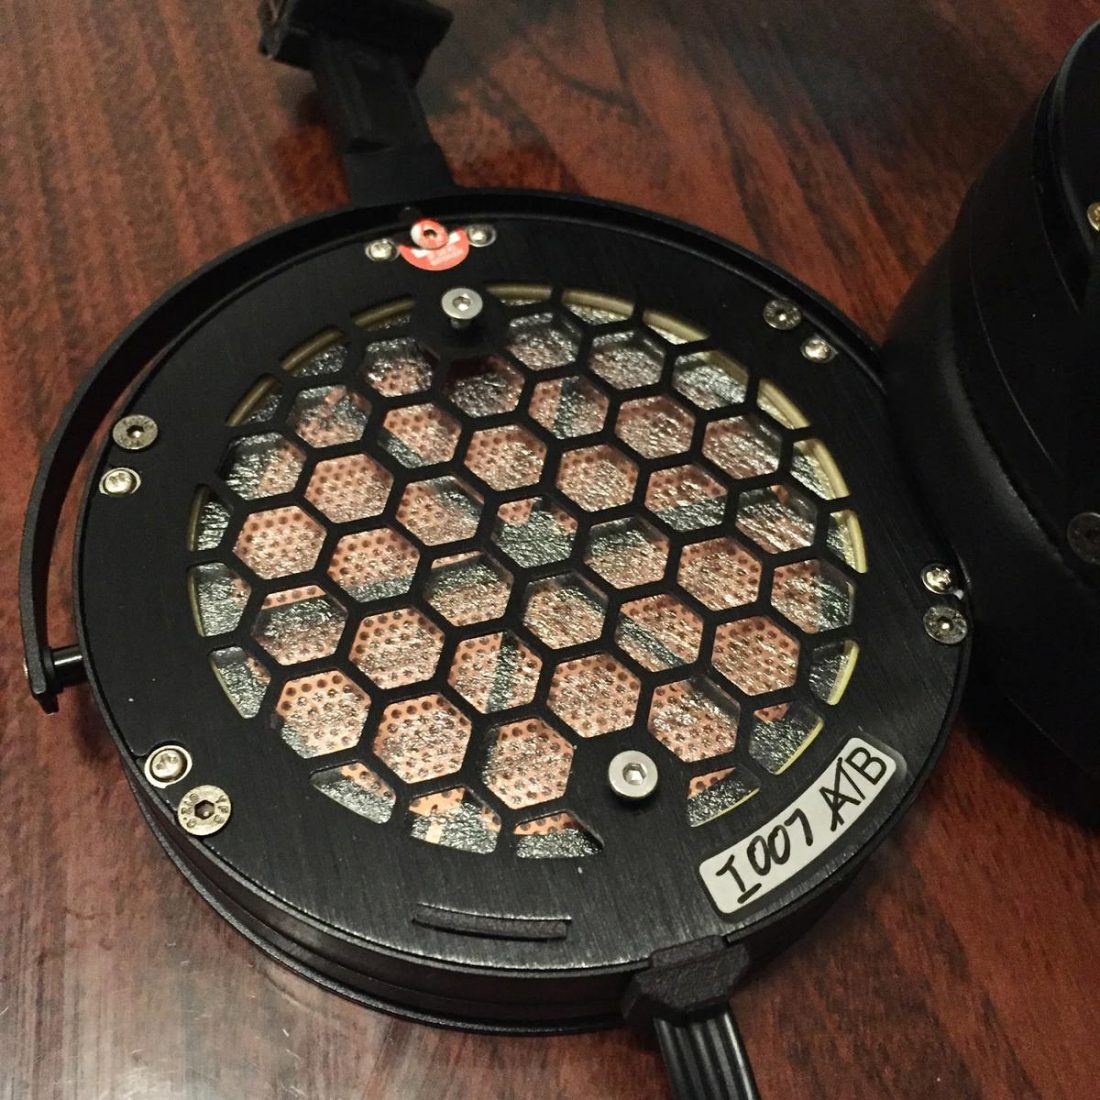 The earpads are held on by two screws; taking the earpads off is pretty quick and painless. Beyond that is the dust cover, and beyond the dust cover is the stator - the hexagonal pattern is to prevent damage.